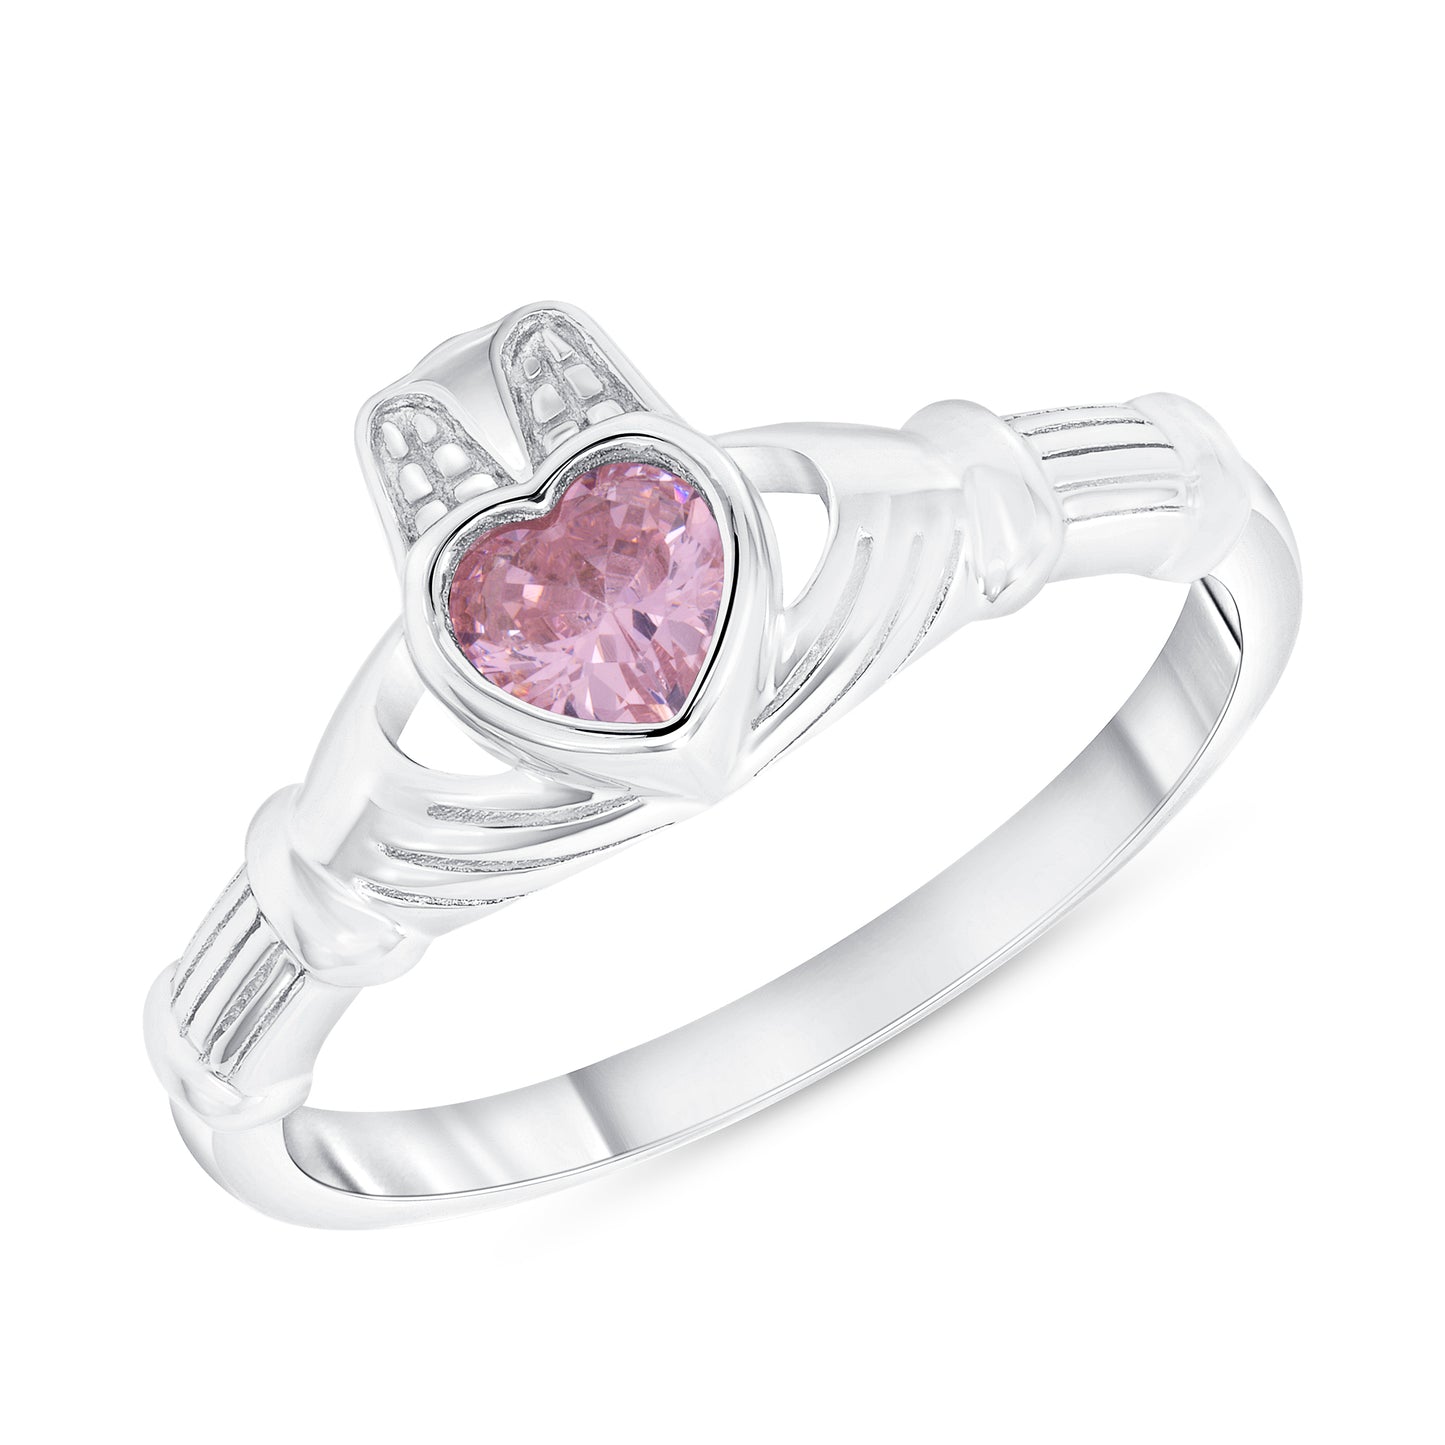 Silver 925 Rhodium Plated Pink Cubic Zirconia Claddagh Ring. DGR2079PNK